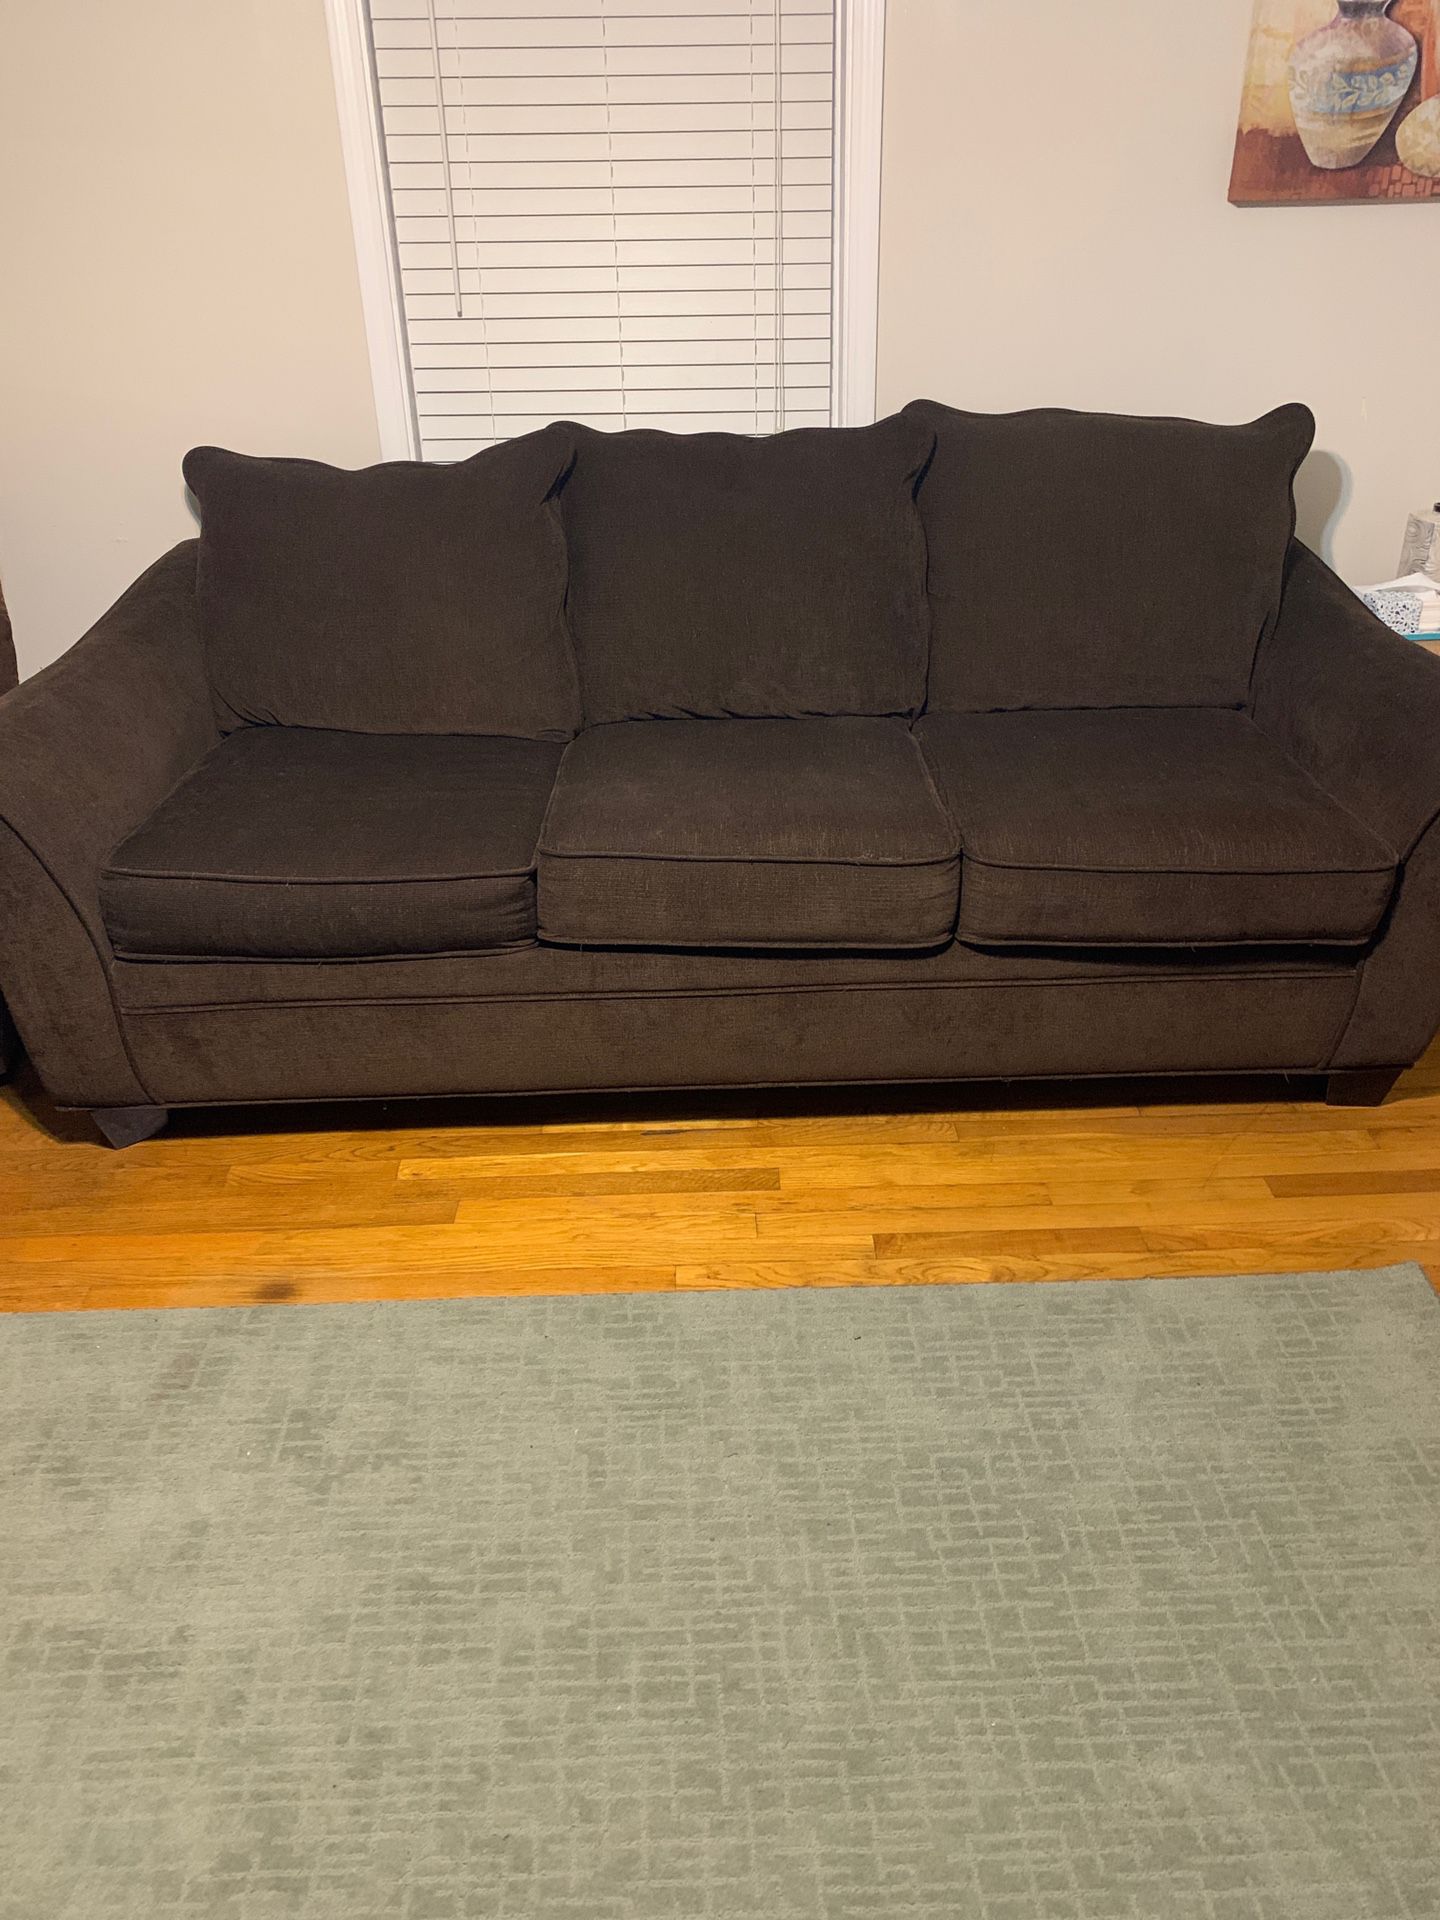 Brown couch good condition , smoke free home!